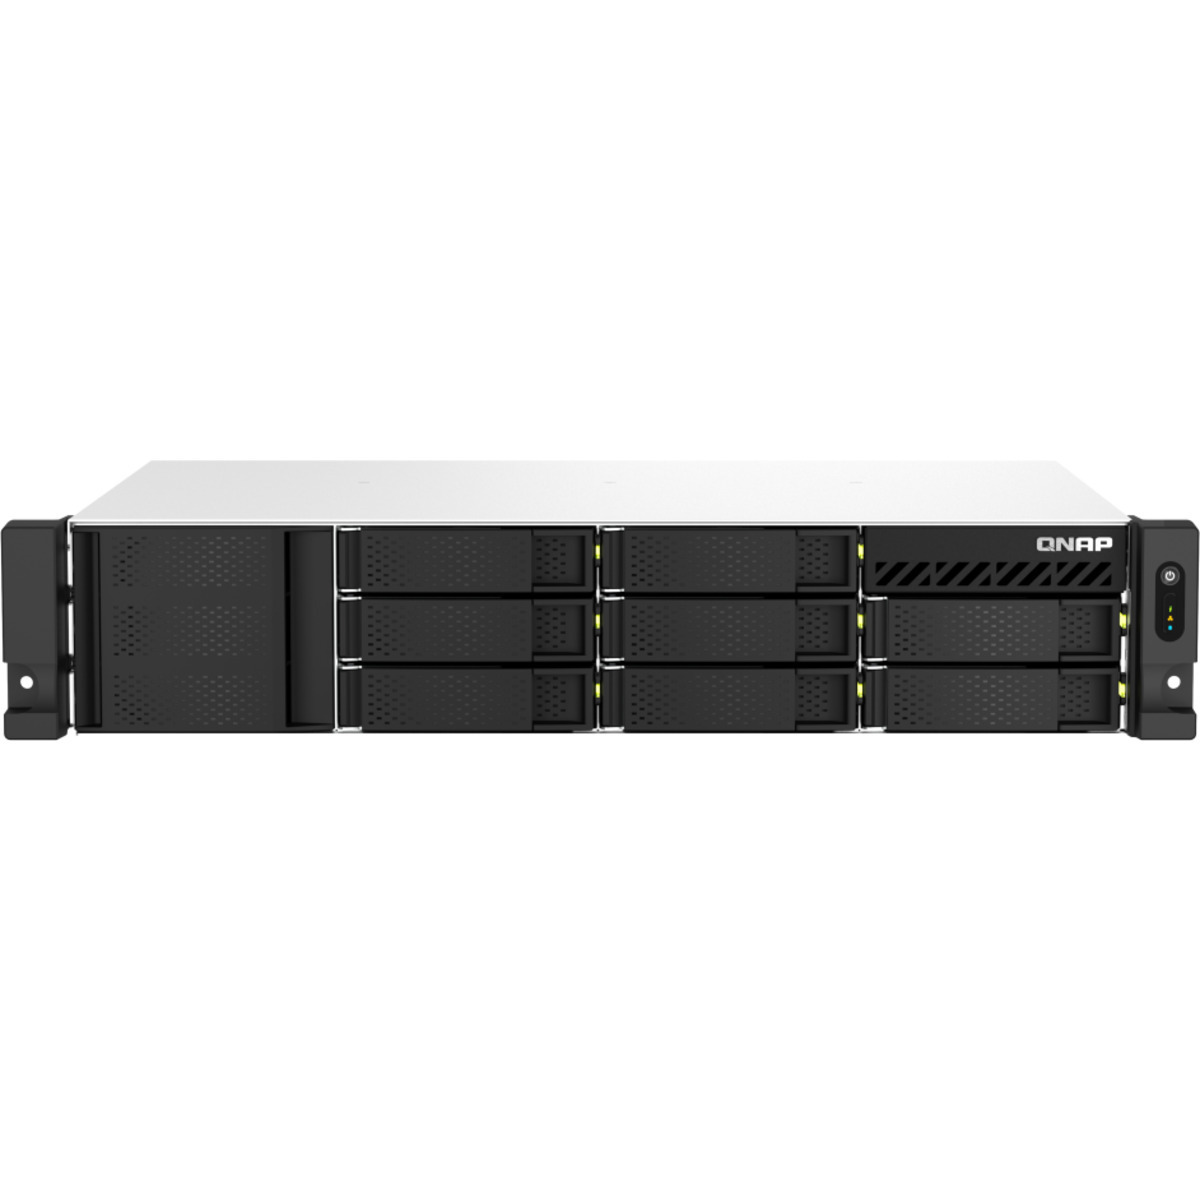 QNAP TS-873AeU 154tb 8-Bay RackMount Multimedia / Power User / Business NAS - Network Attached Storage Device 7x22tb Seagate EXOS X22 ST22000NM001E 3.5 7200rpm SATA 6Gb/s HDD ENTERPRISE Class Drives Installed - Burn-In Tested - FREE RAM UPGRADE TS-873AeU